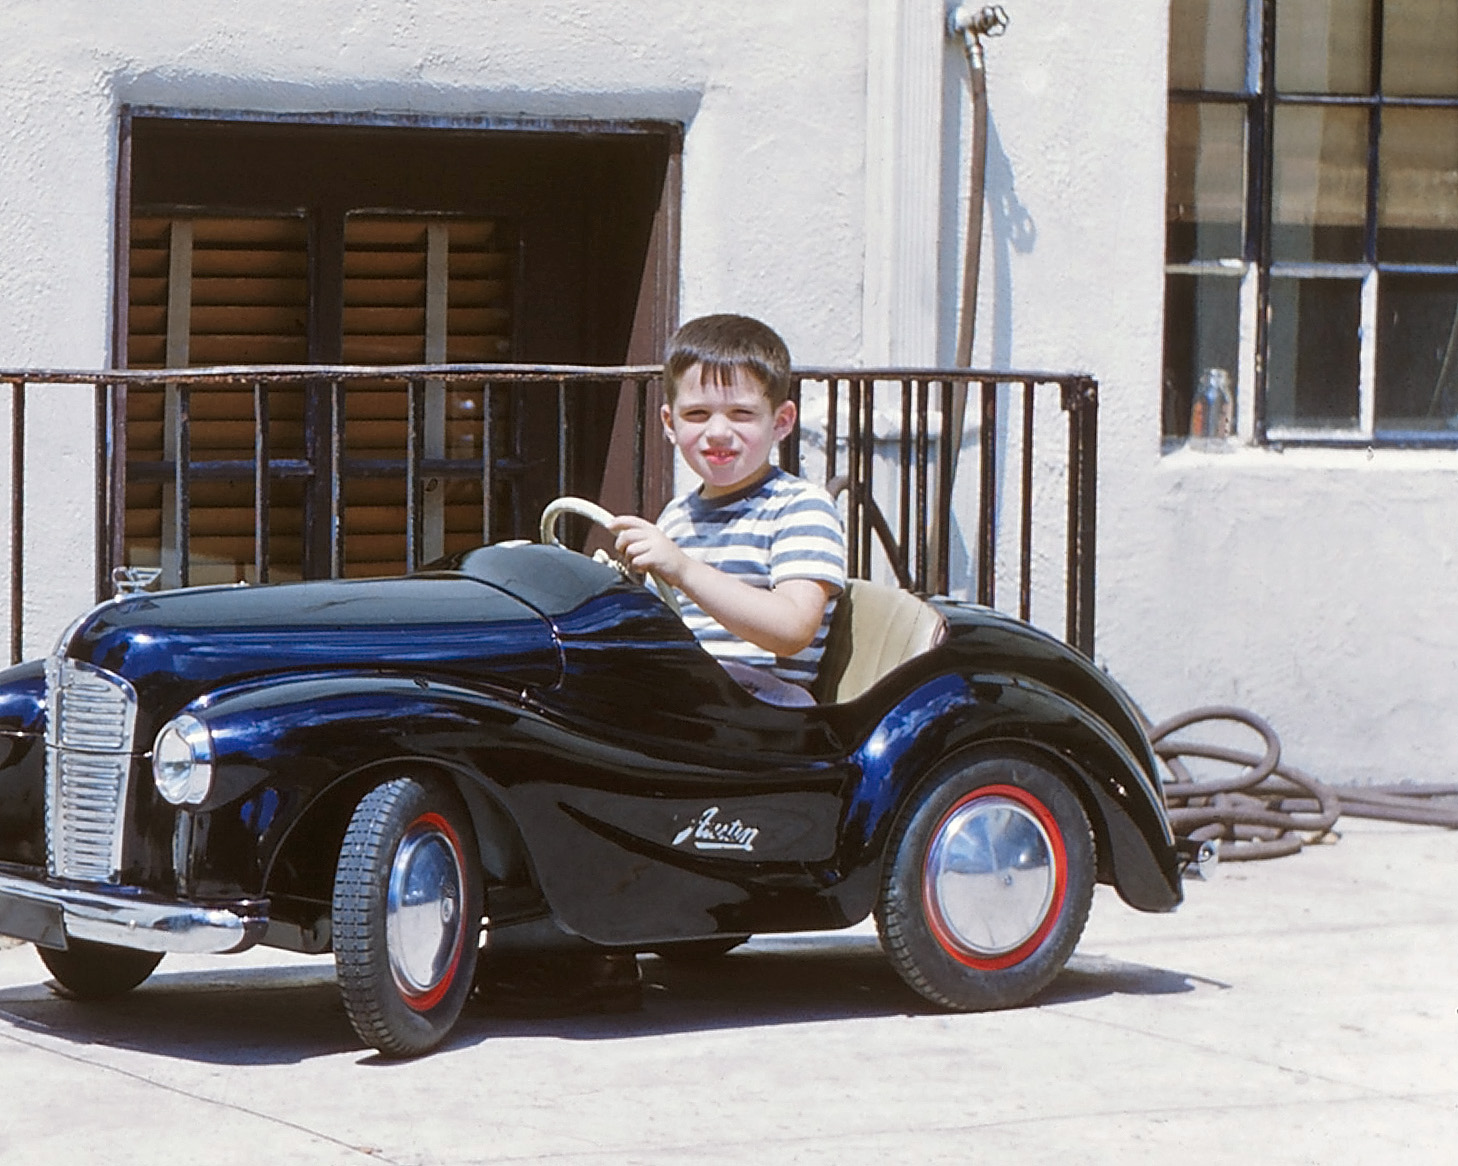 Austin pedal car circa 1949, also seen here. From a set of found Kodachromes I acquired in northern New Jersey. View full size.